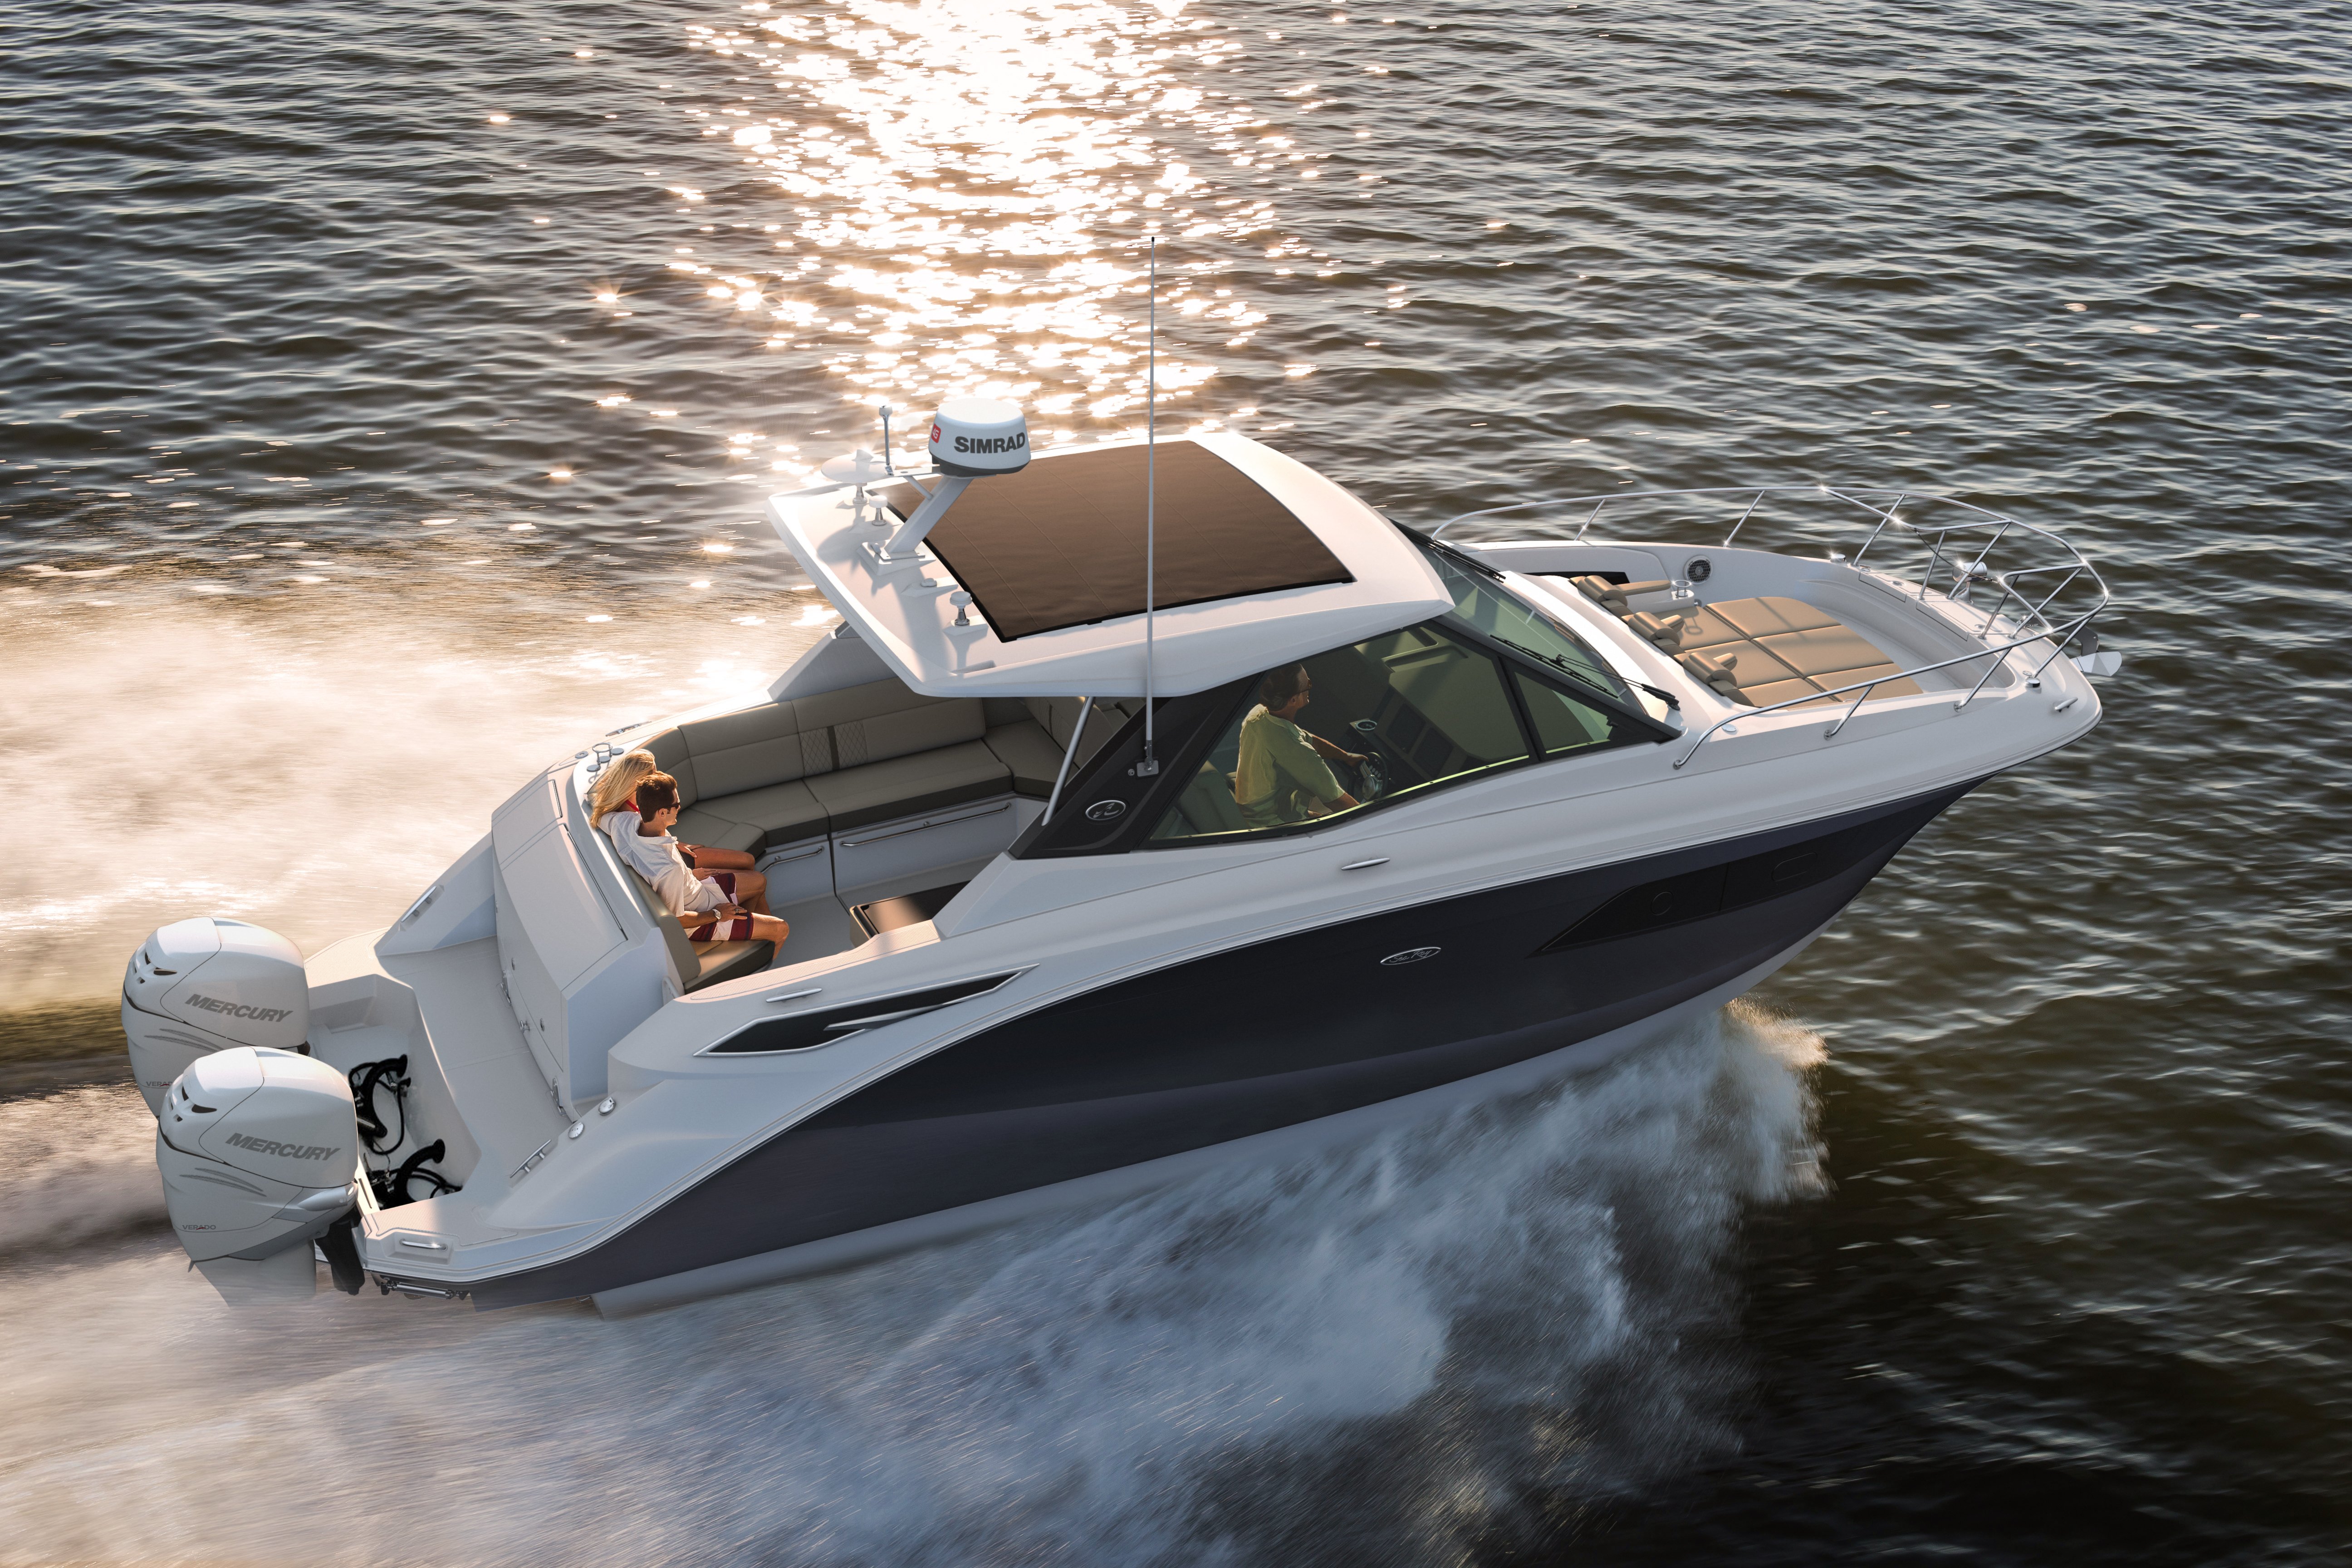 SEA RAY® INTRODUCES BRAND-NEW SUNDANCER® 320 COUPE OUTBOARD MODEL